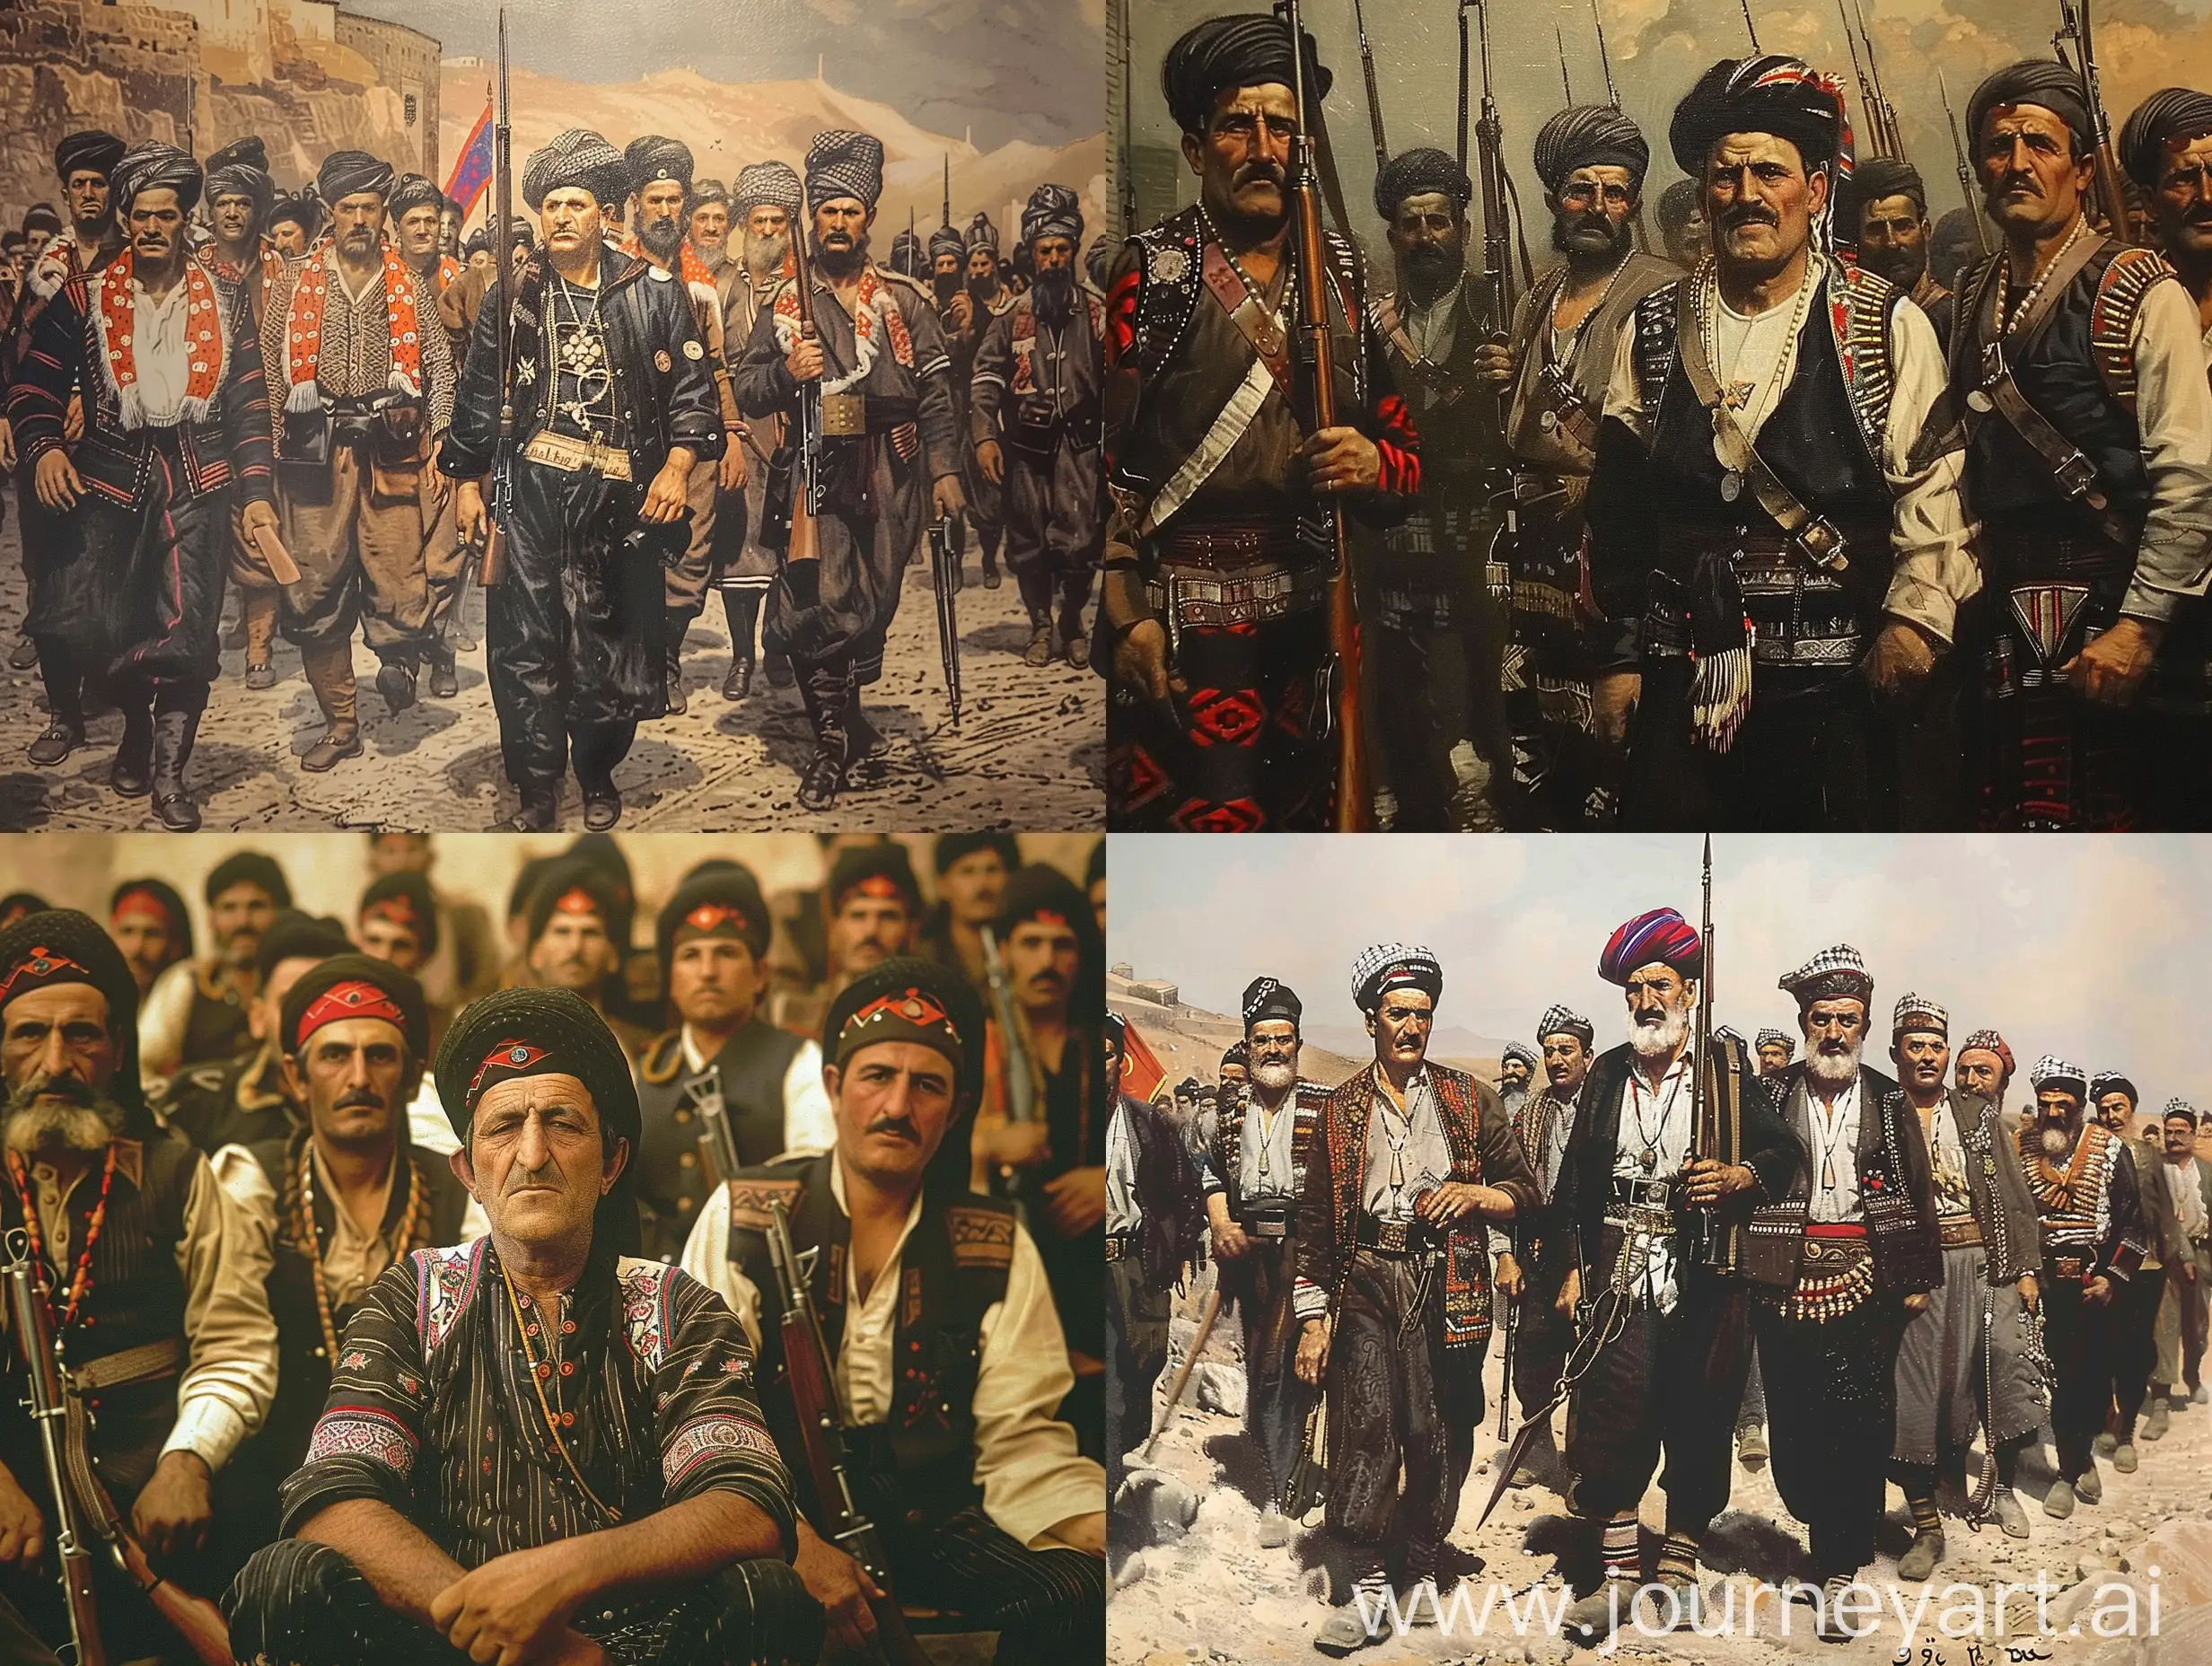 With the establishment of the regular army, Yörük Ali Efe and a large group of highly skilled and experienced men under his command joined the Army of the Grand National Assembly of Turkey (TBMM). Yörük Ali Efe was appointed as the Commander of the National Aydin Front with the rank of Militia Miralay. In this important position, he continued to lead the resistance and fight against enemy forces in the Aydin region. As a result of his outstanding achievements and courageous actions, he was awarded the Independence Medal with a red ribbon by the Turkish Grand National Assembly at the end of the Turkish War of Independence.